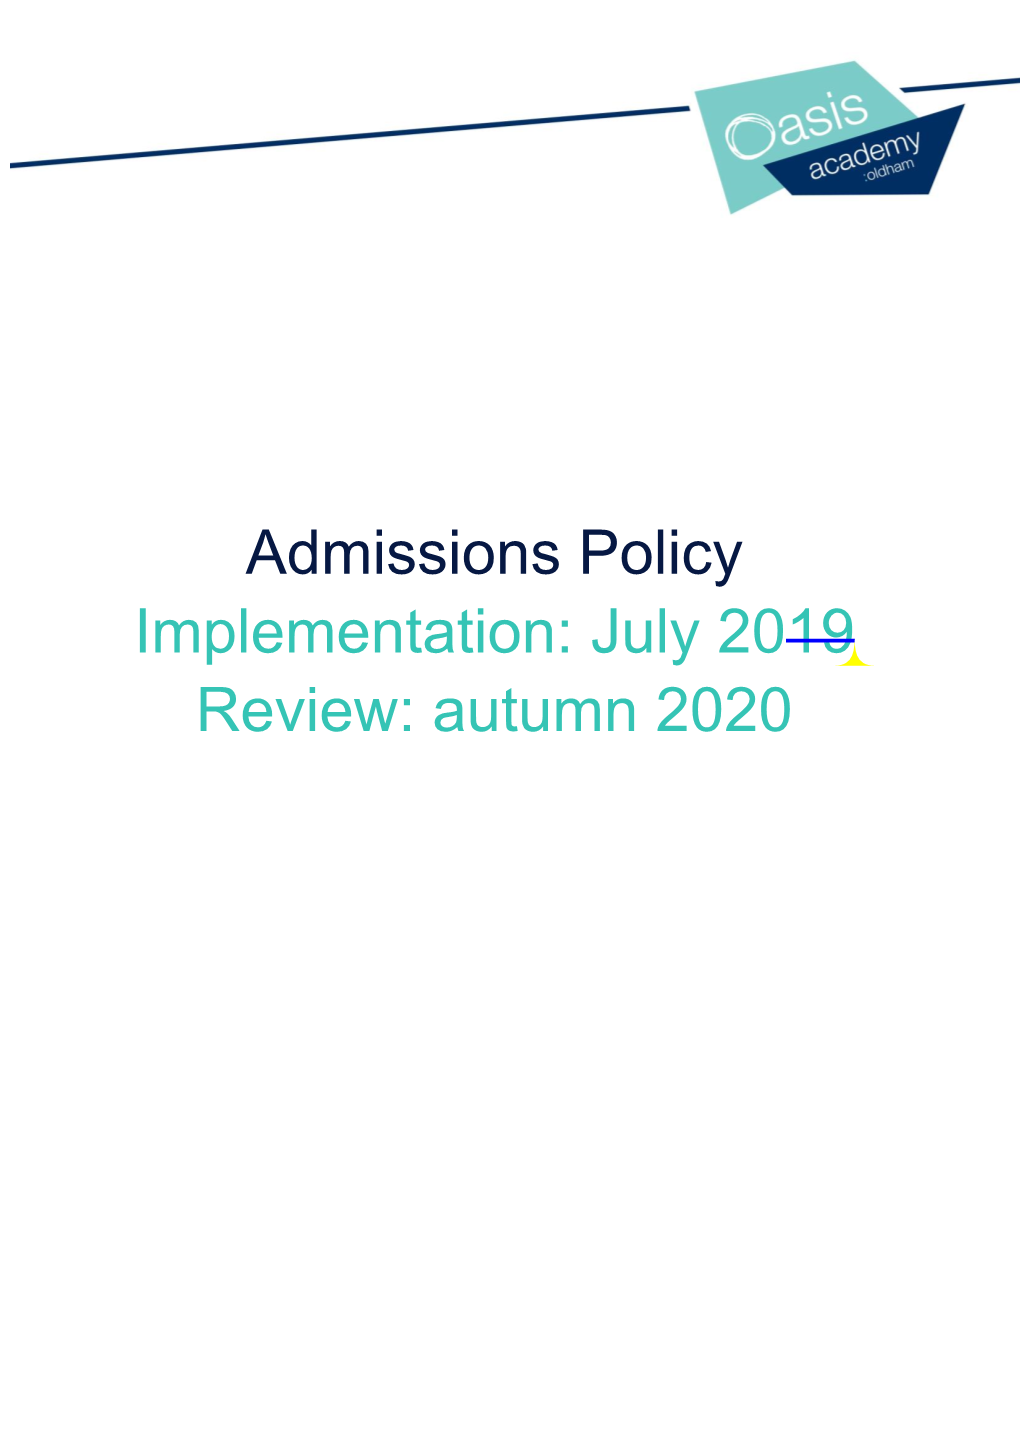 Admissions Policy Implementation: July 2019 Review: Autumn 2020